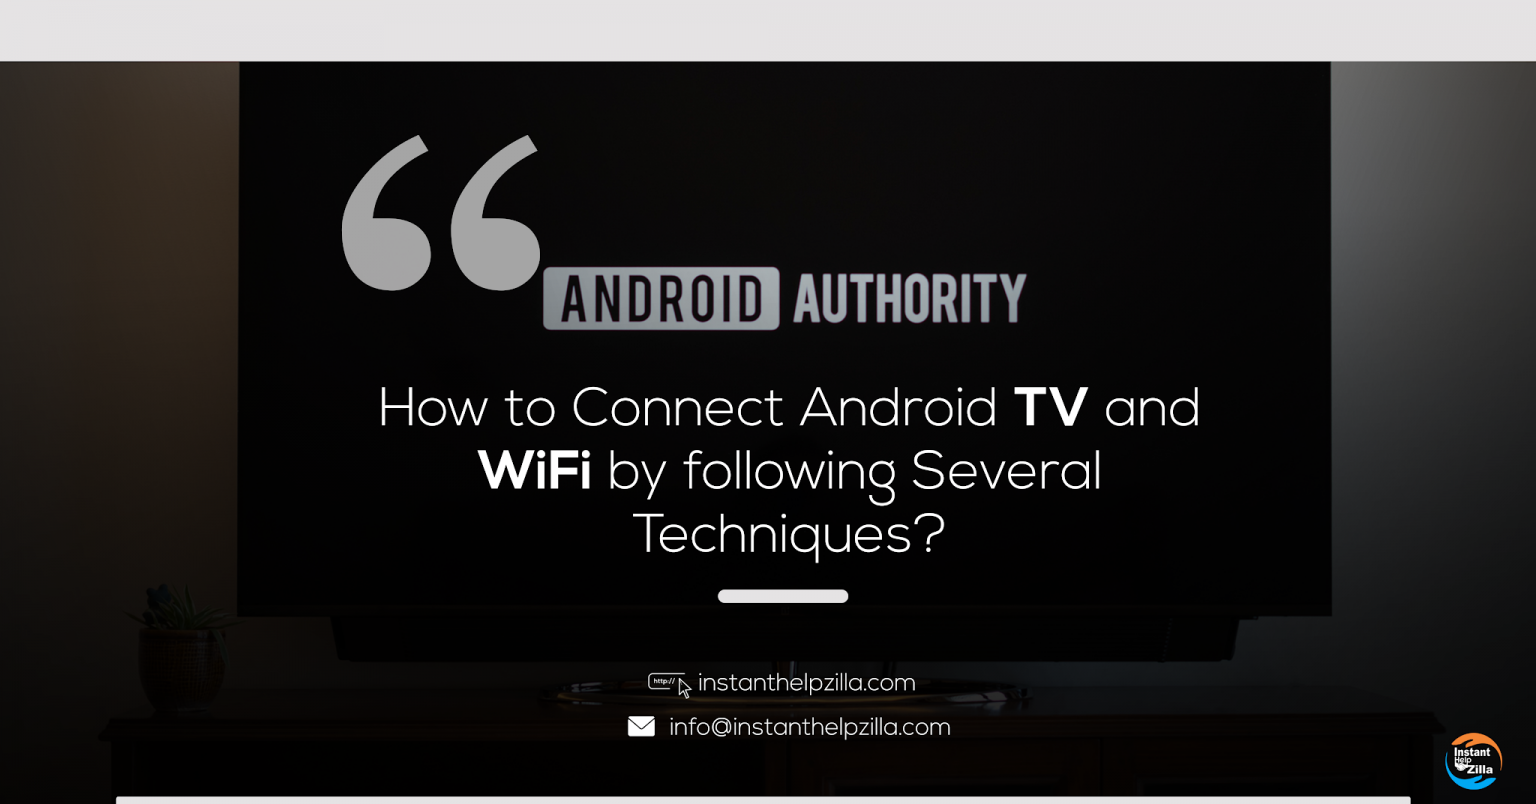 How to connect android TV to Wi-Fi